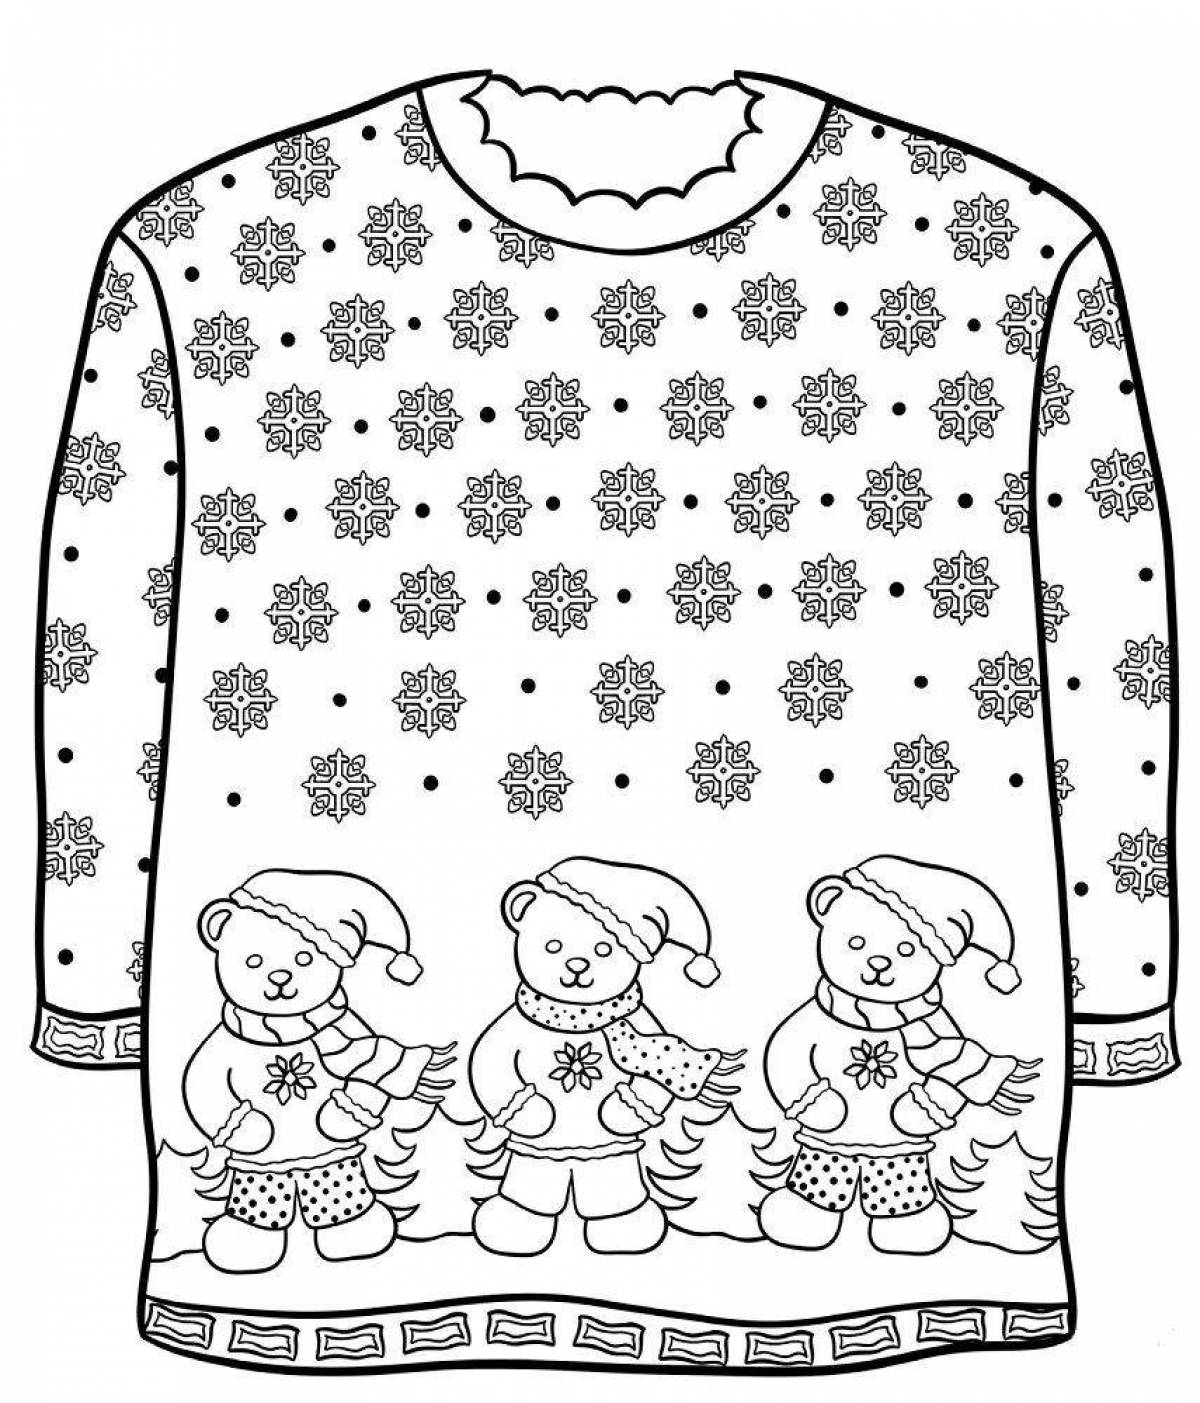 Attractive Christmas sweater coloring